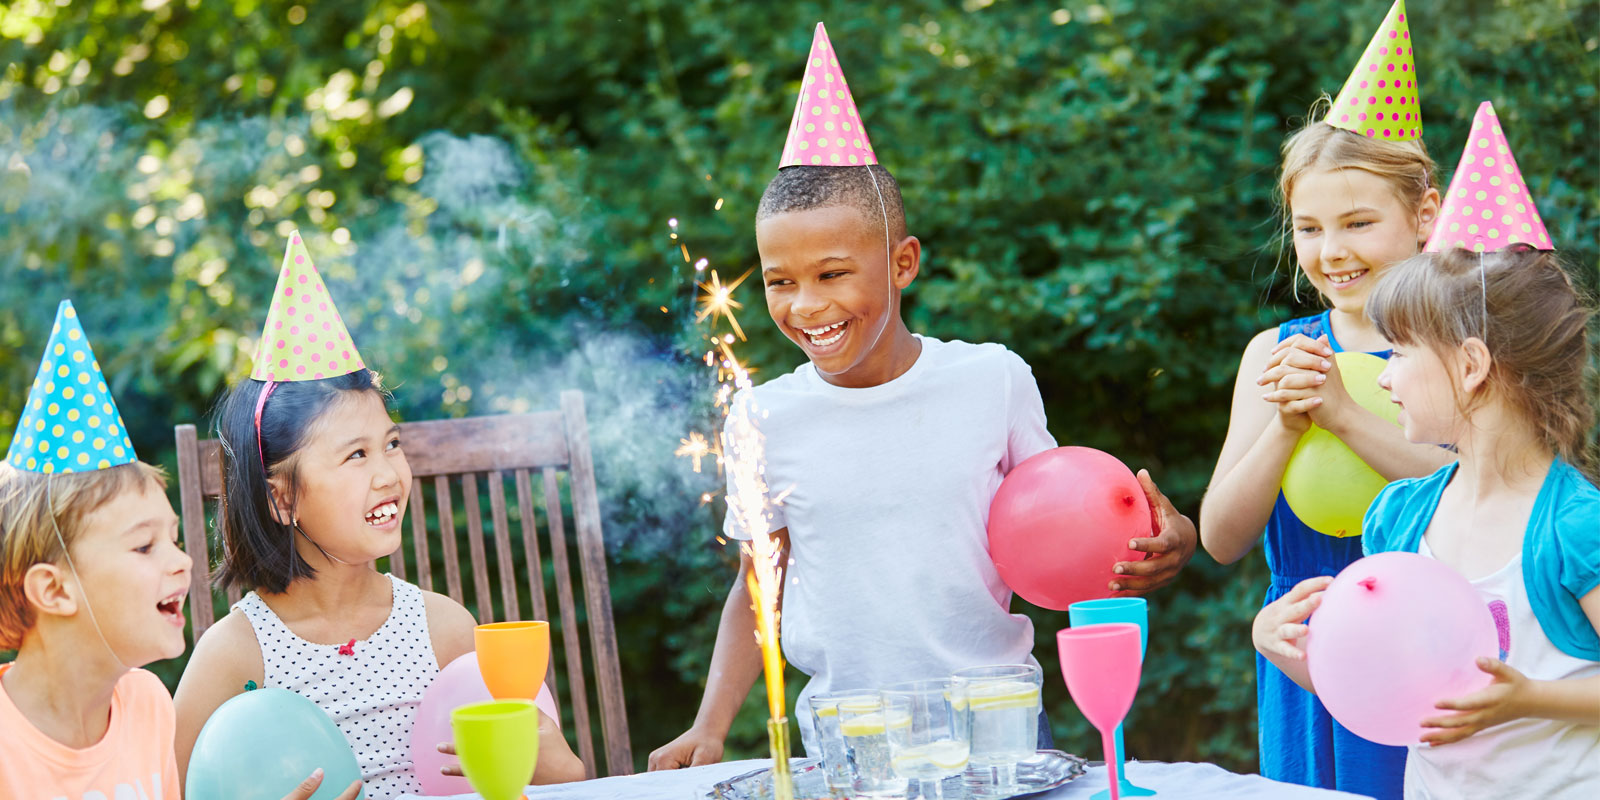 one of the best birthday party ideas for kids in Northern VA